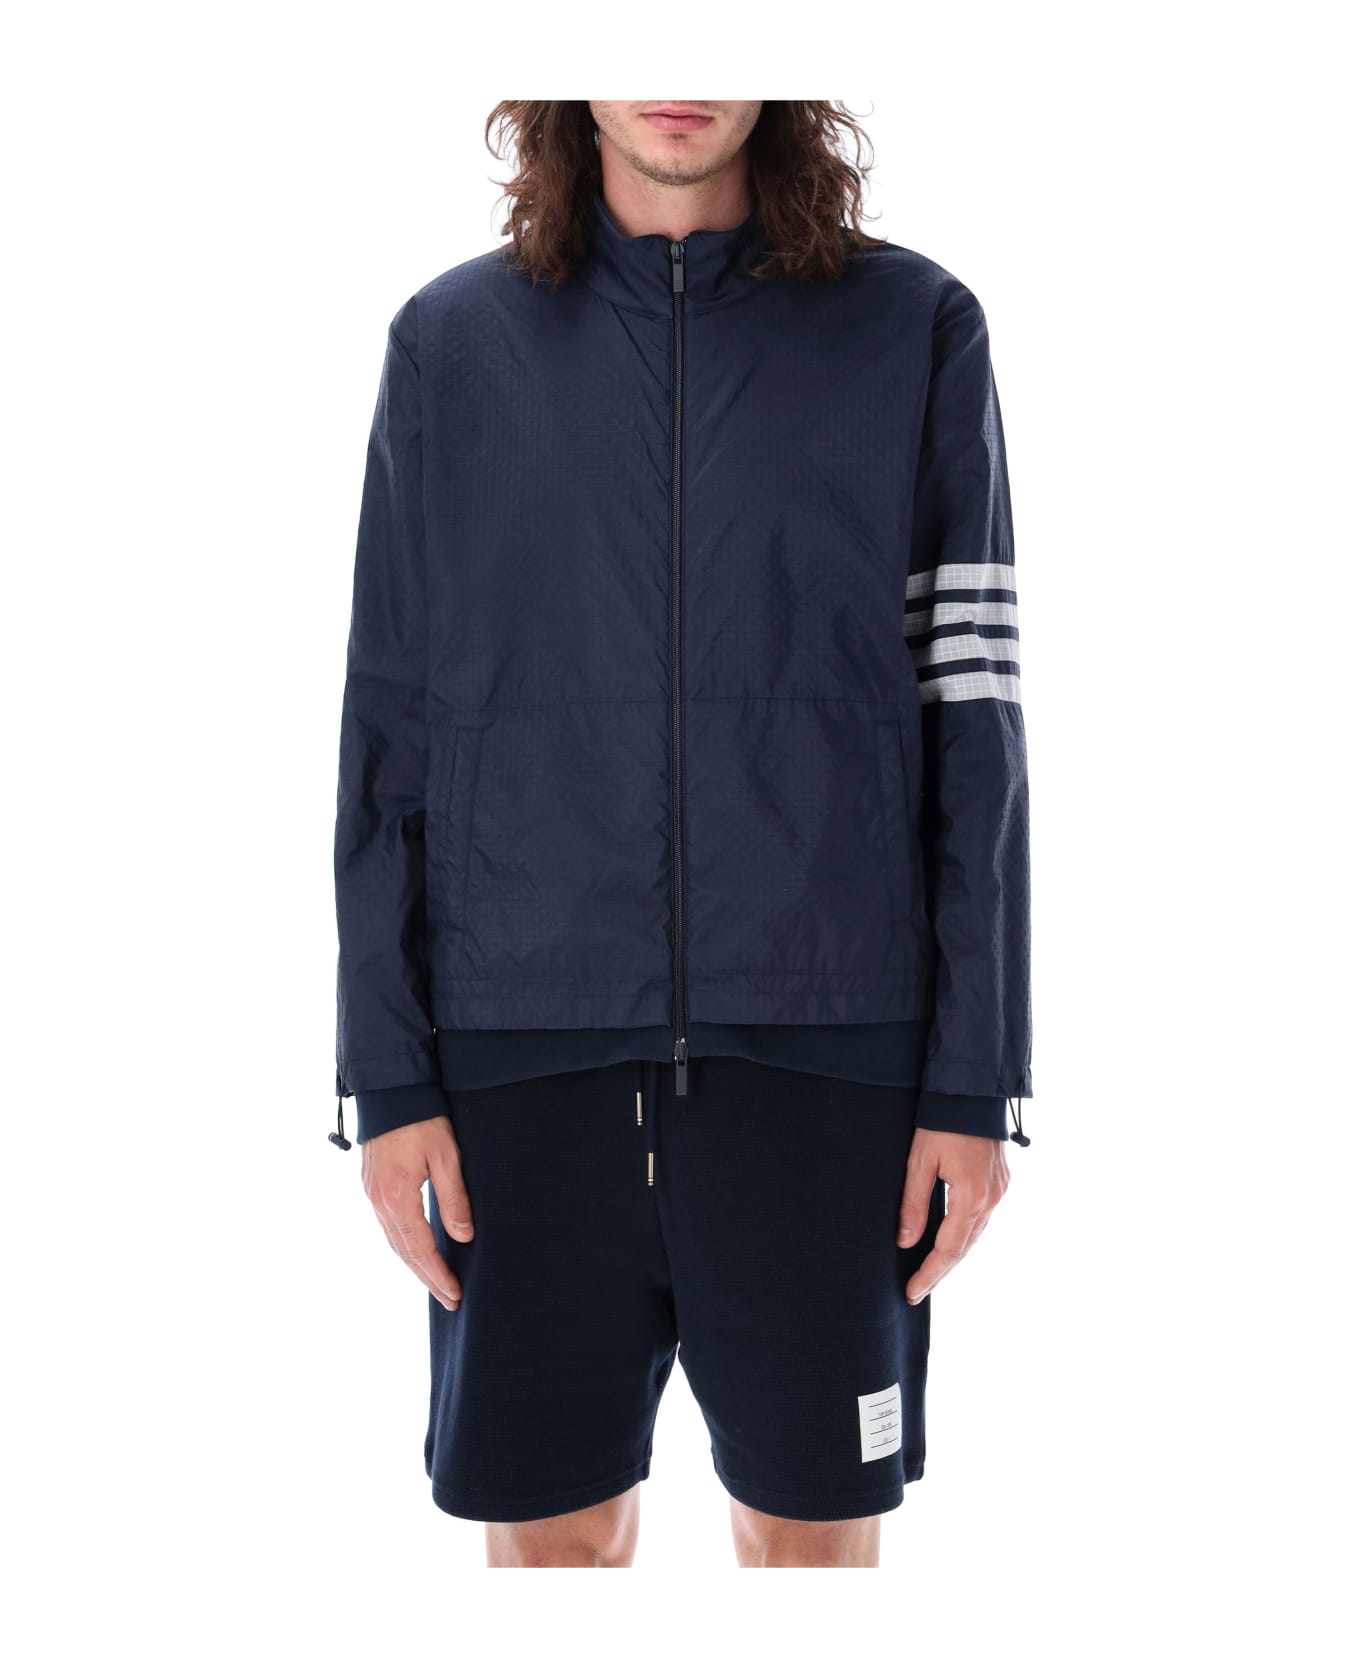 Thom Browne Funnel Neck Jacket With 4 Bars - NAVY